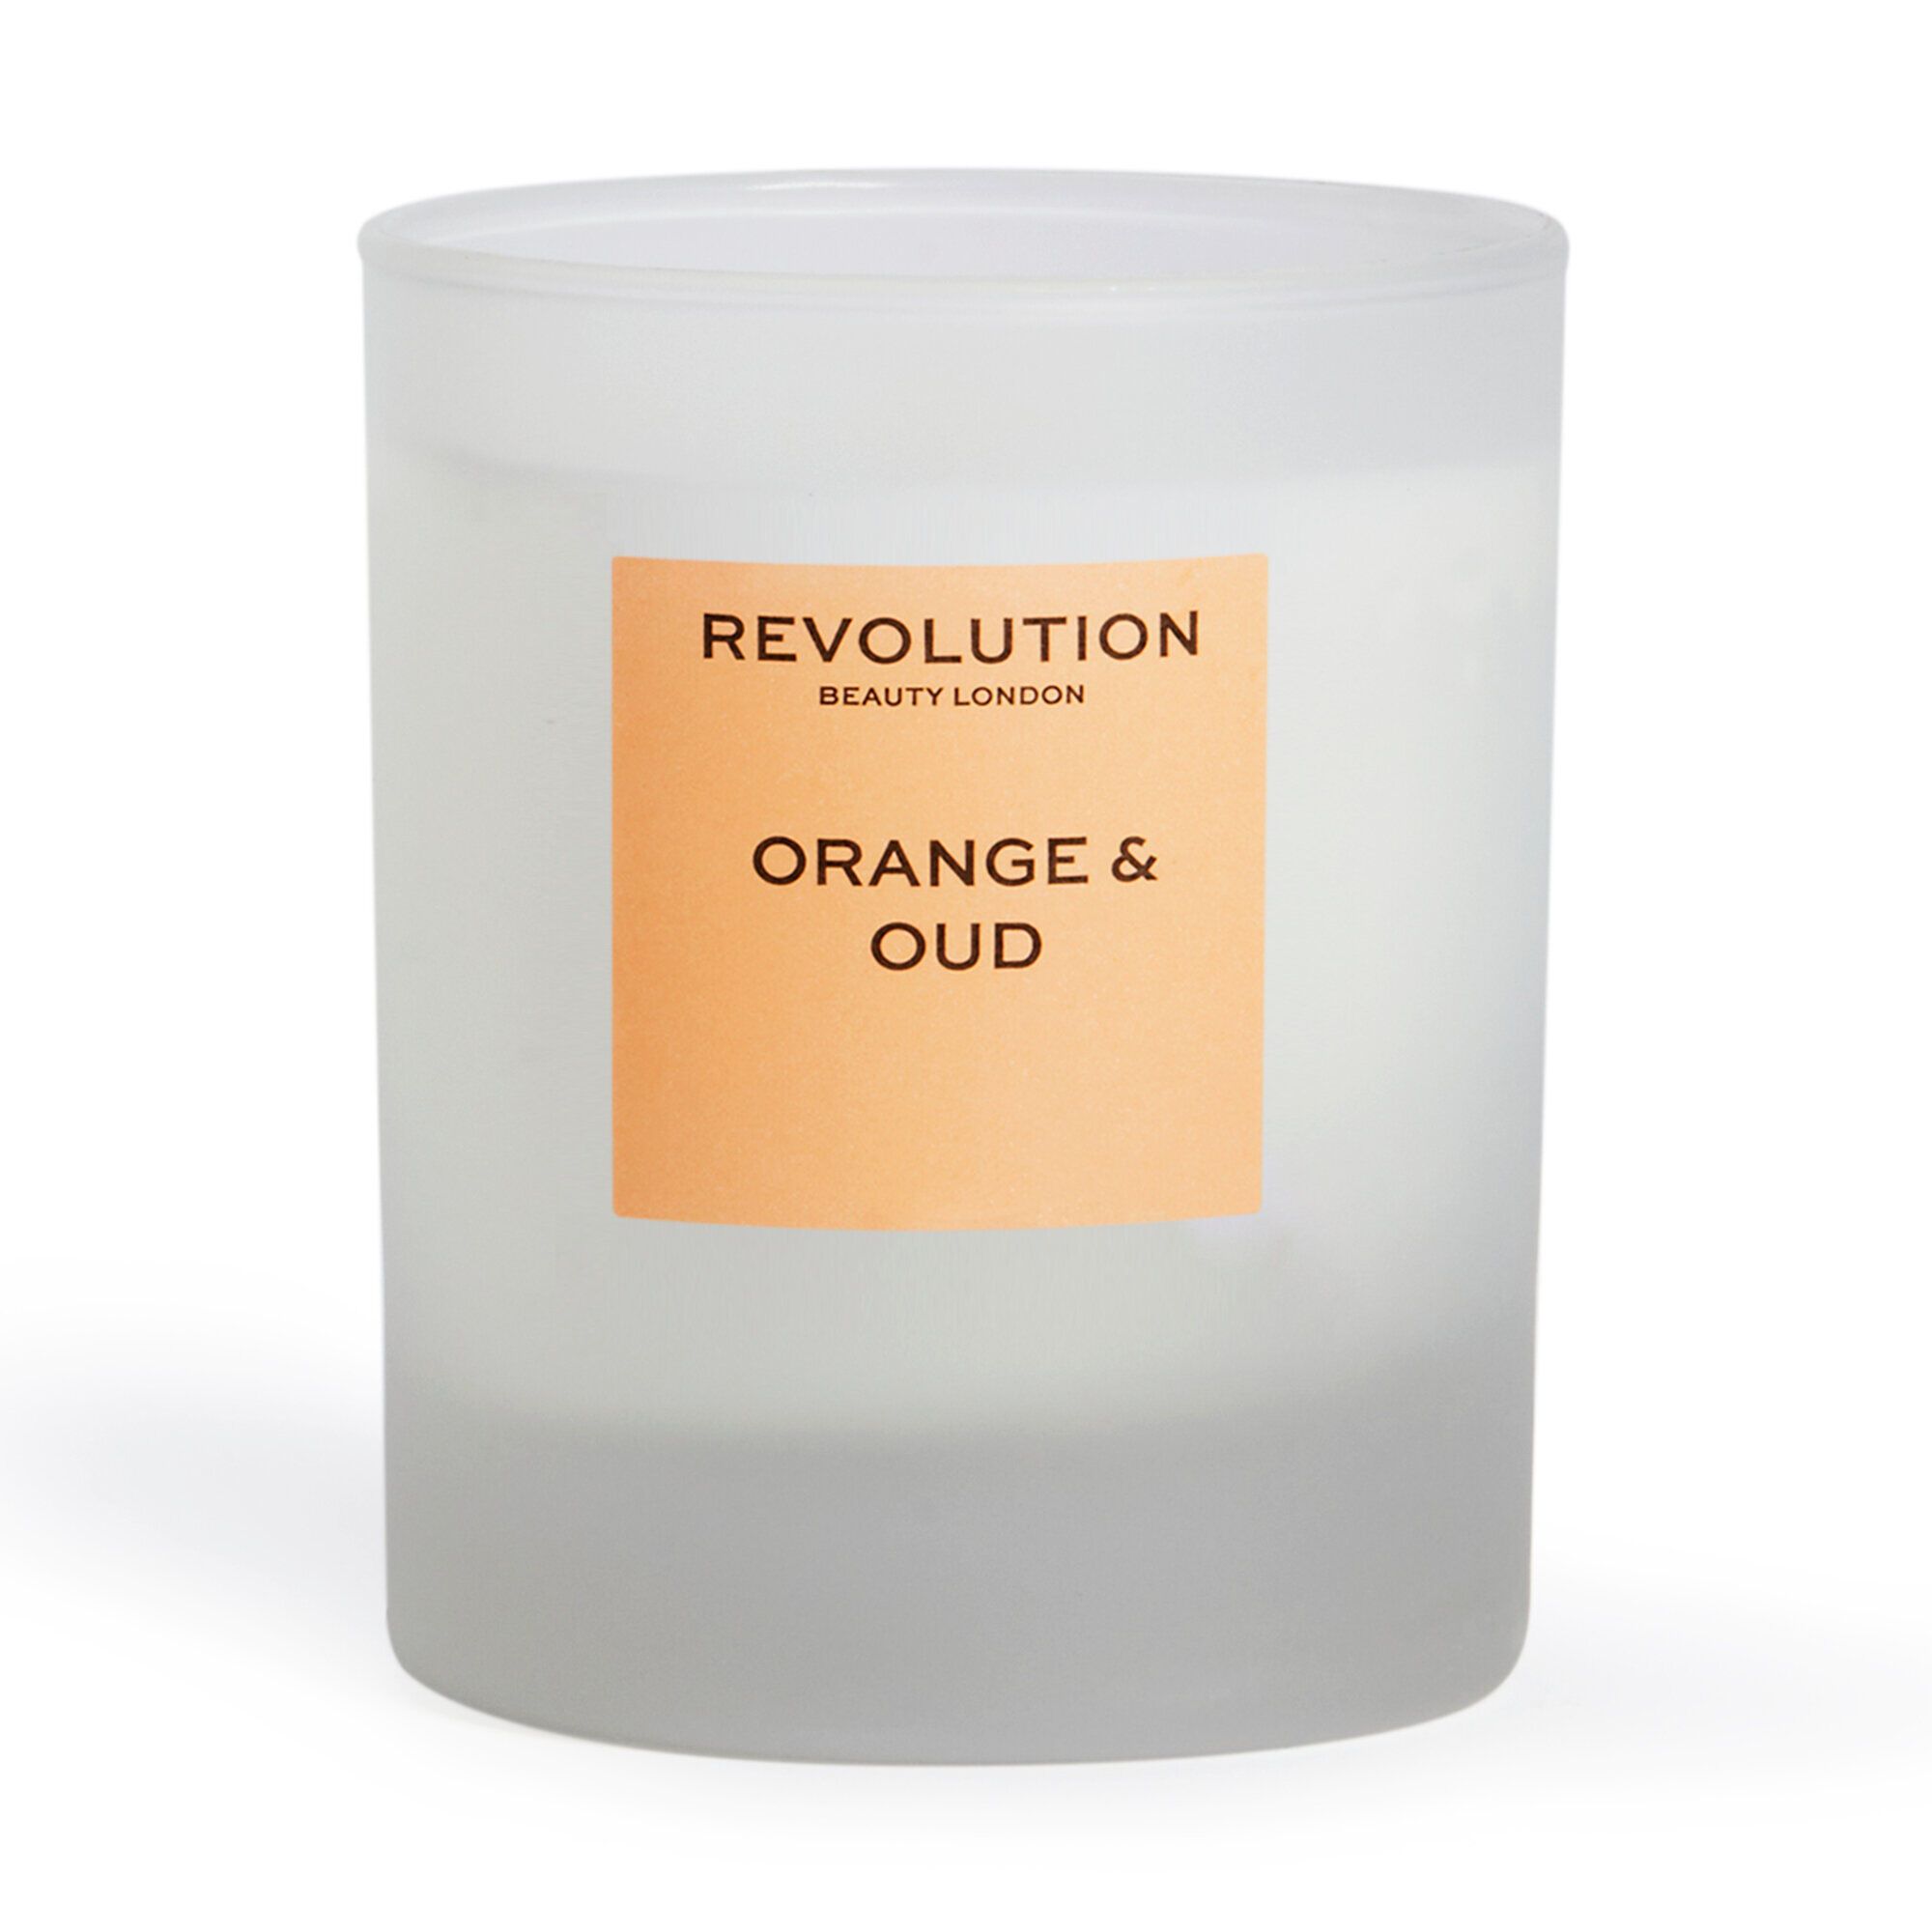 Bougie Parfumée - Scented Candle